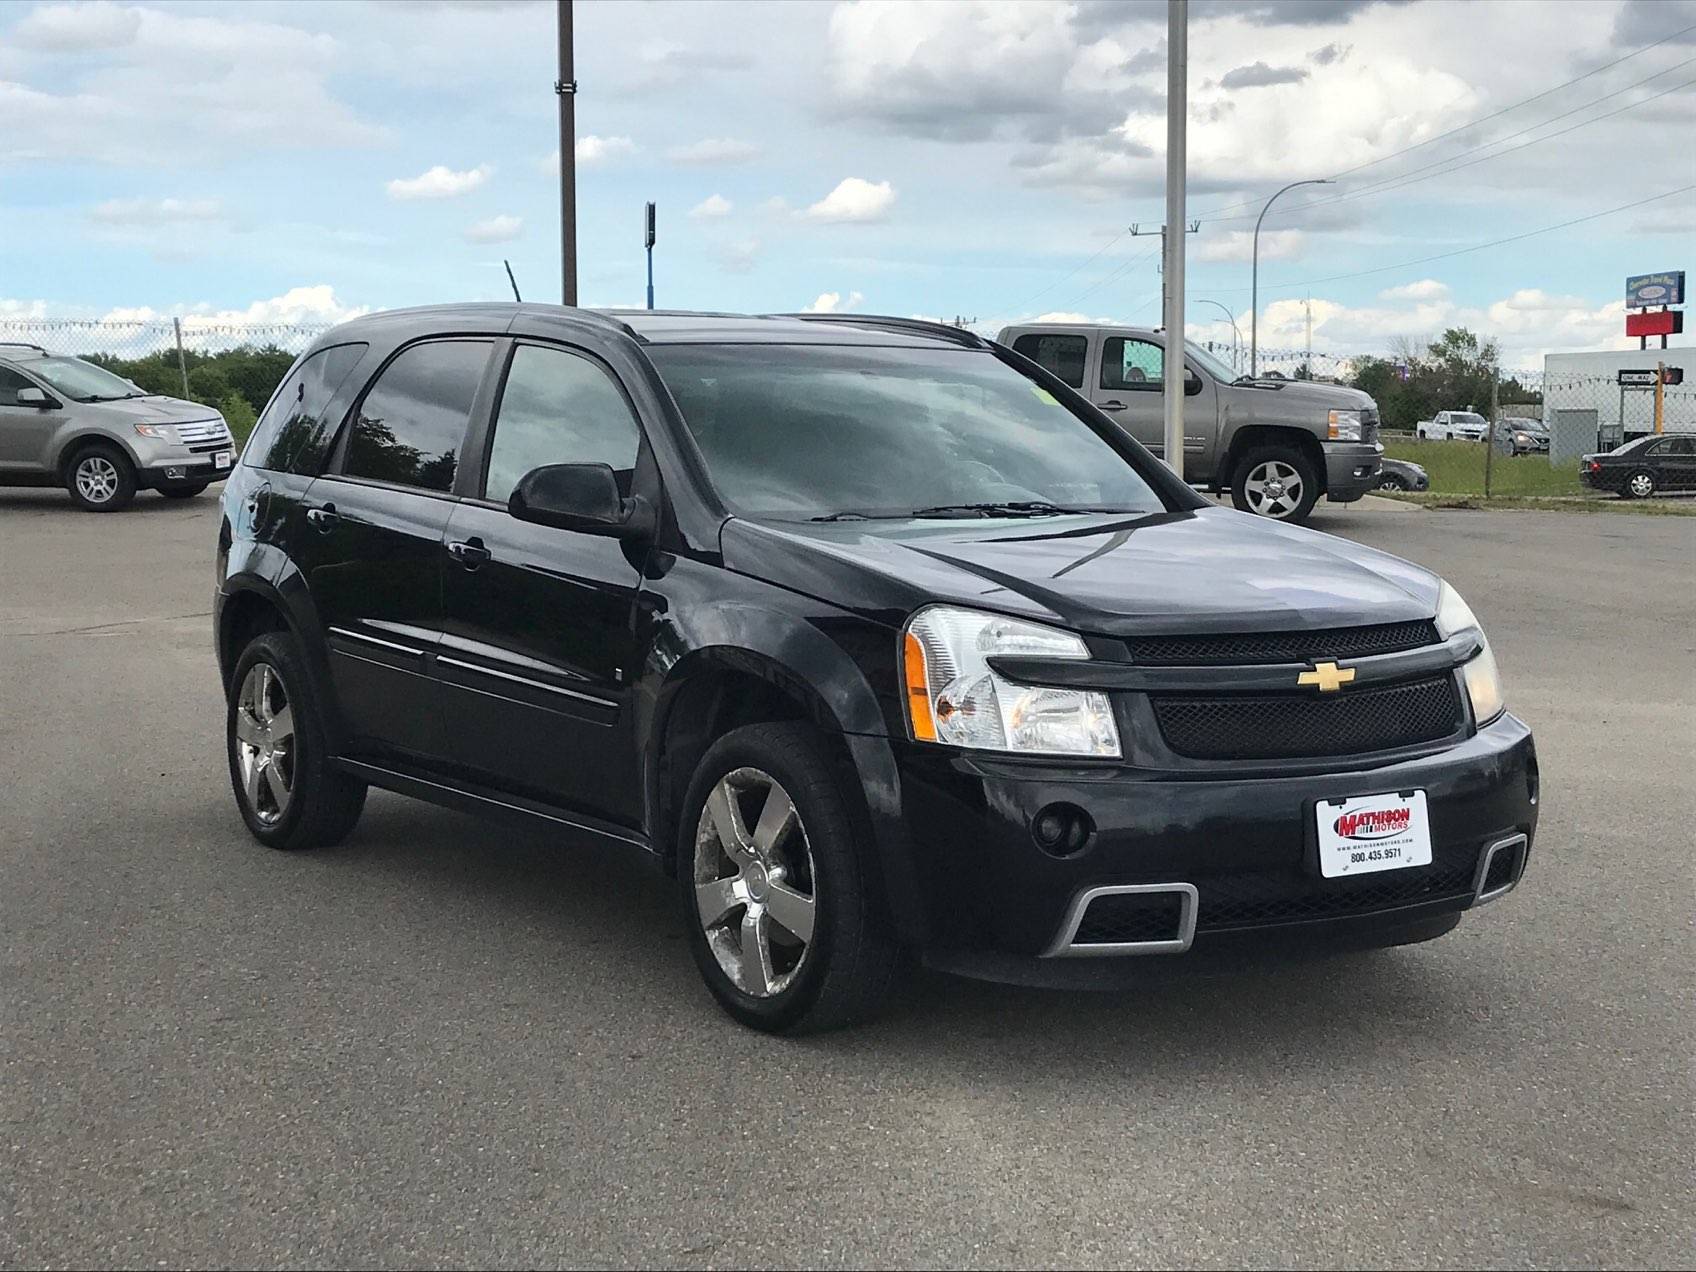 Used 2008 CHEVROLET EQUINOX SPORT for sale in MATHISON